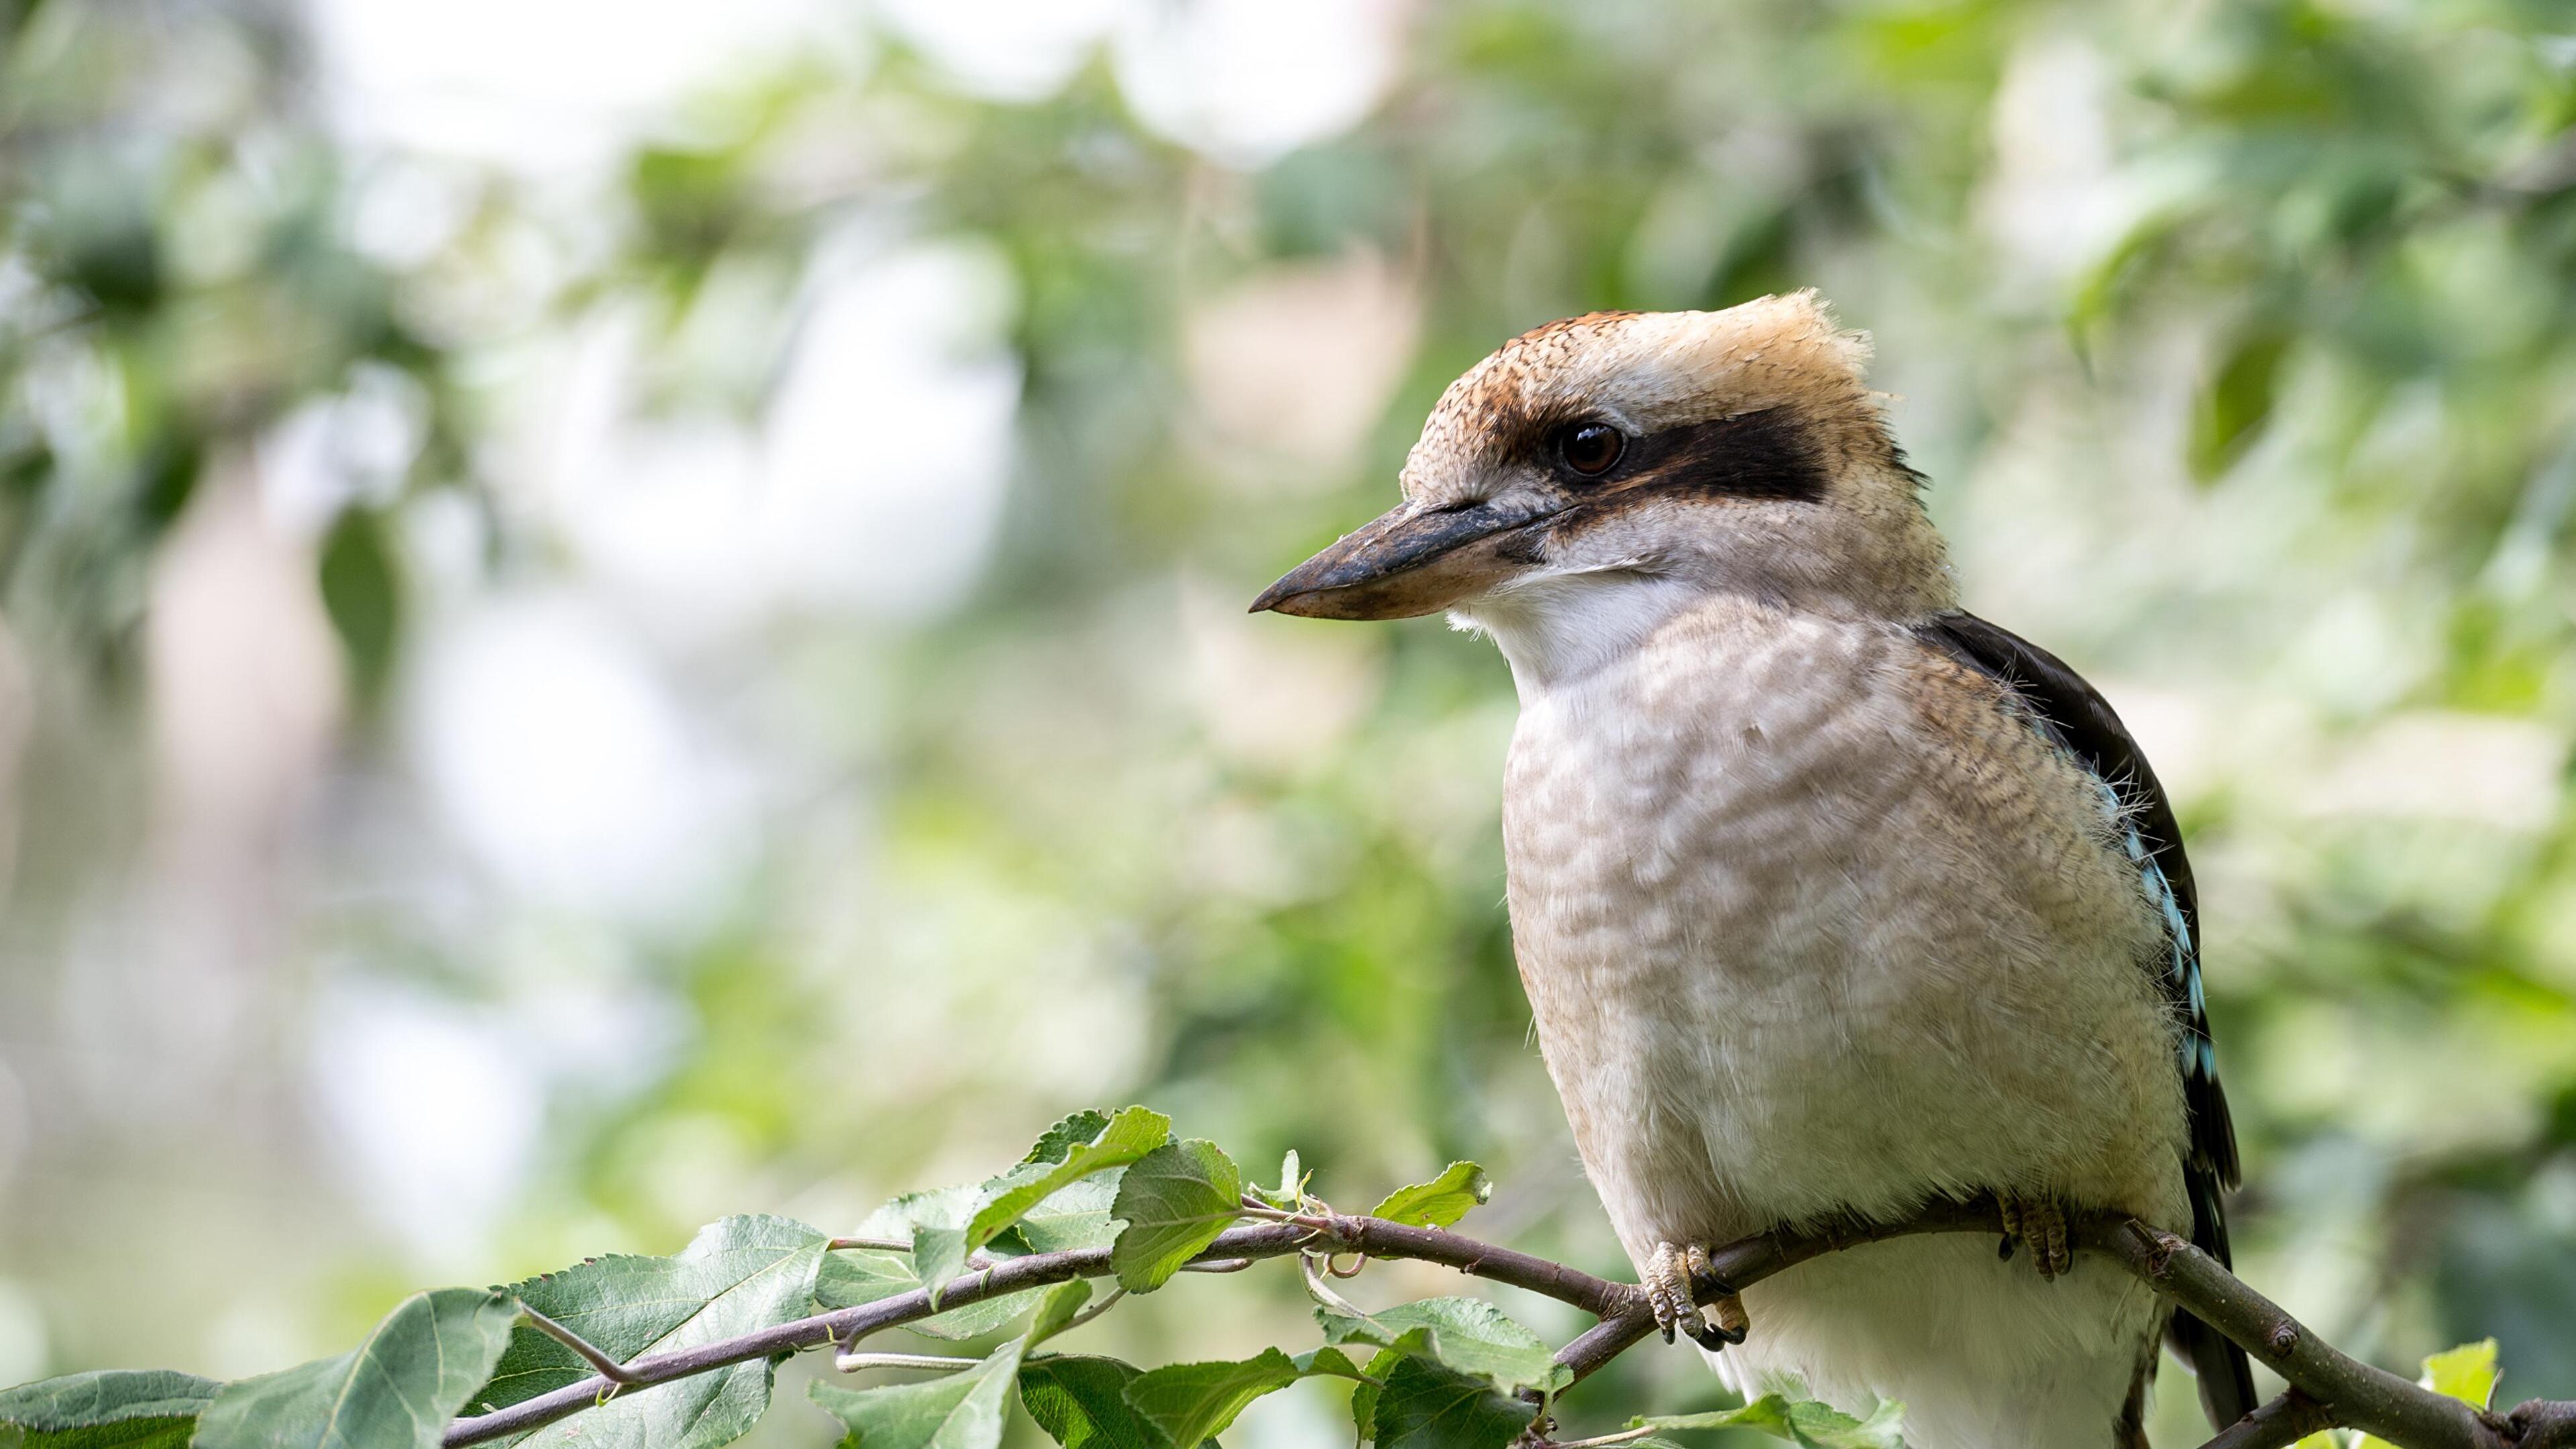 Kookaburra 4K wallpaper for your desktop or mobile screen free and easy to download